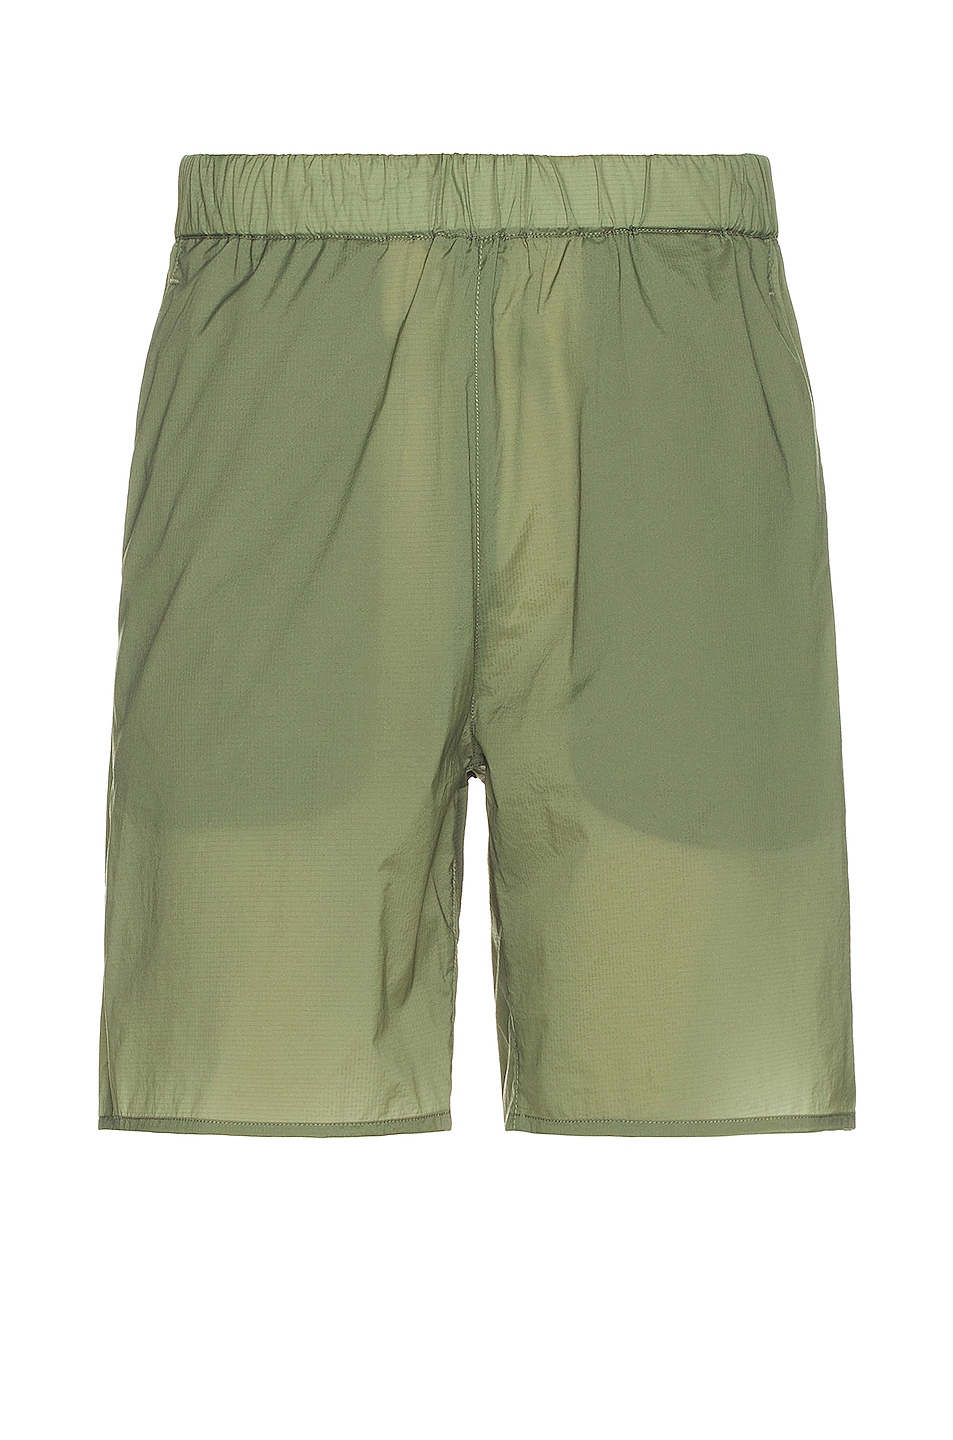 Image 1 of Norse Projects Poul Light Nylon Shorts in Dried Sage Green